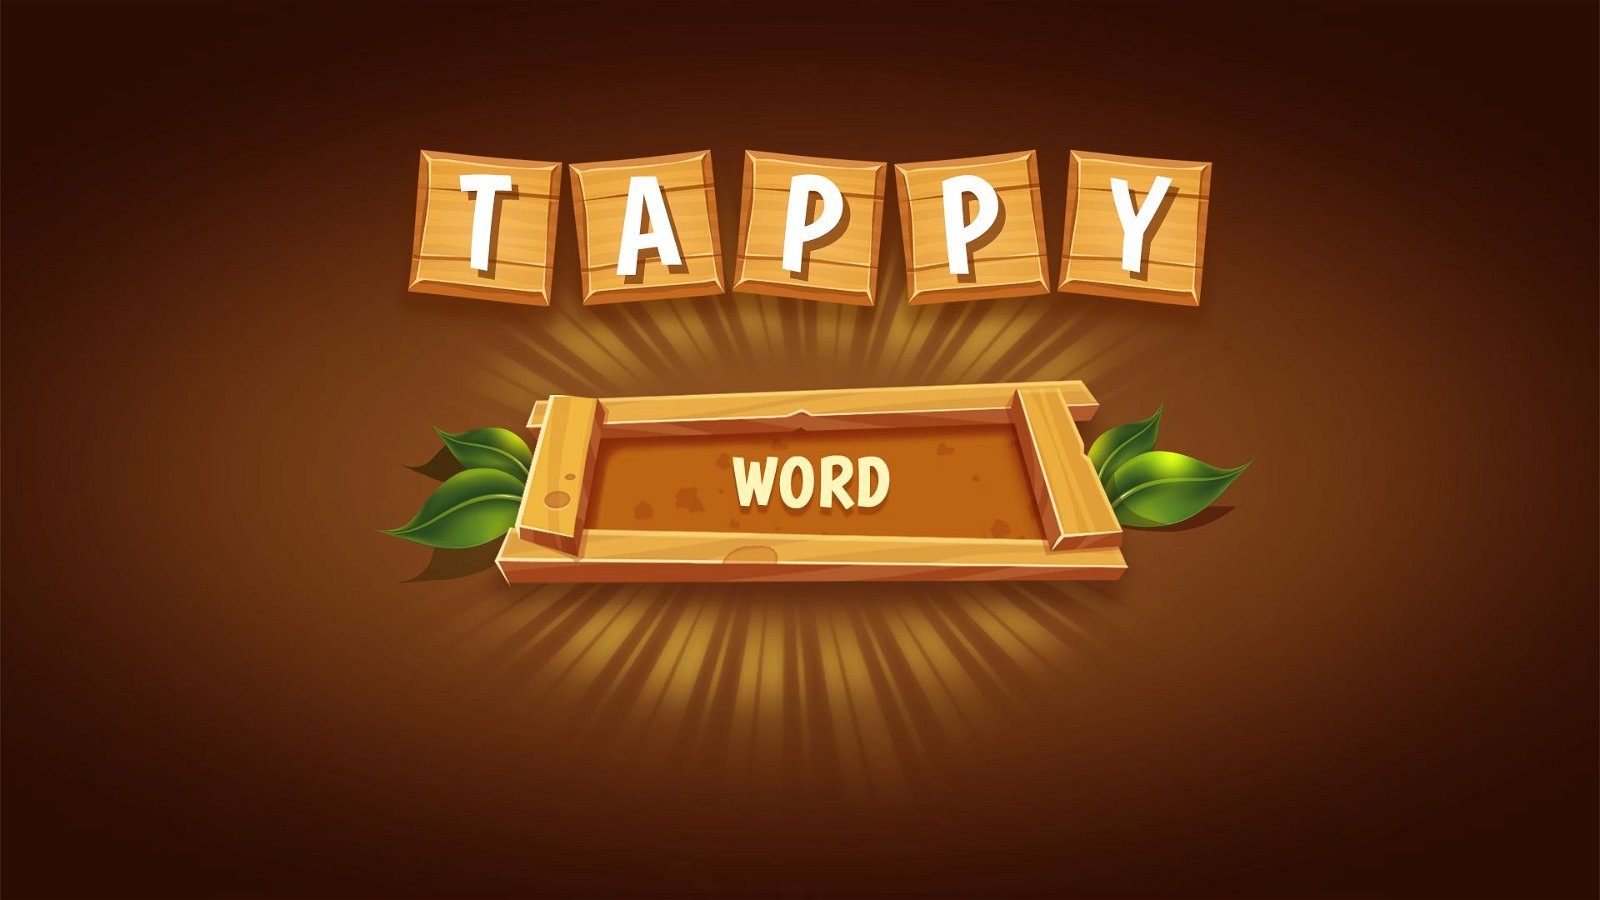 Image of Tappy Word